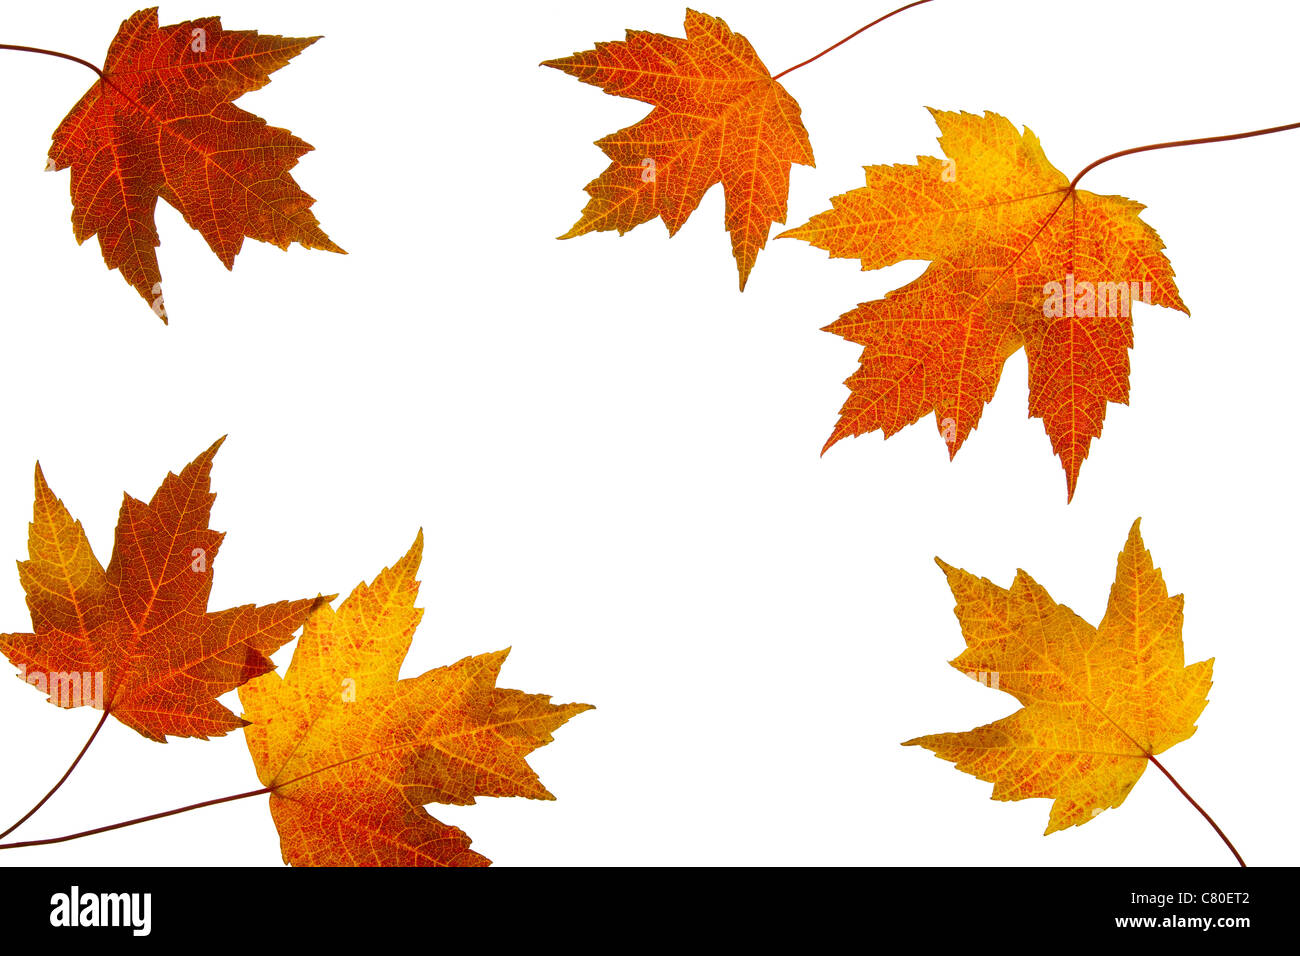 Scattered Fall Maple Leaves Isolated on White Background Stock Photo